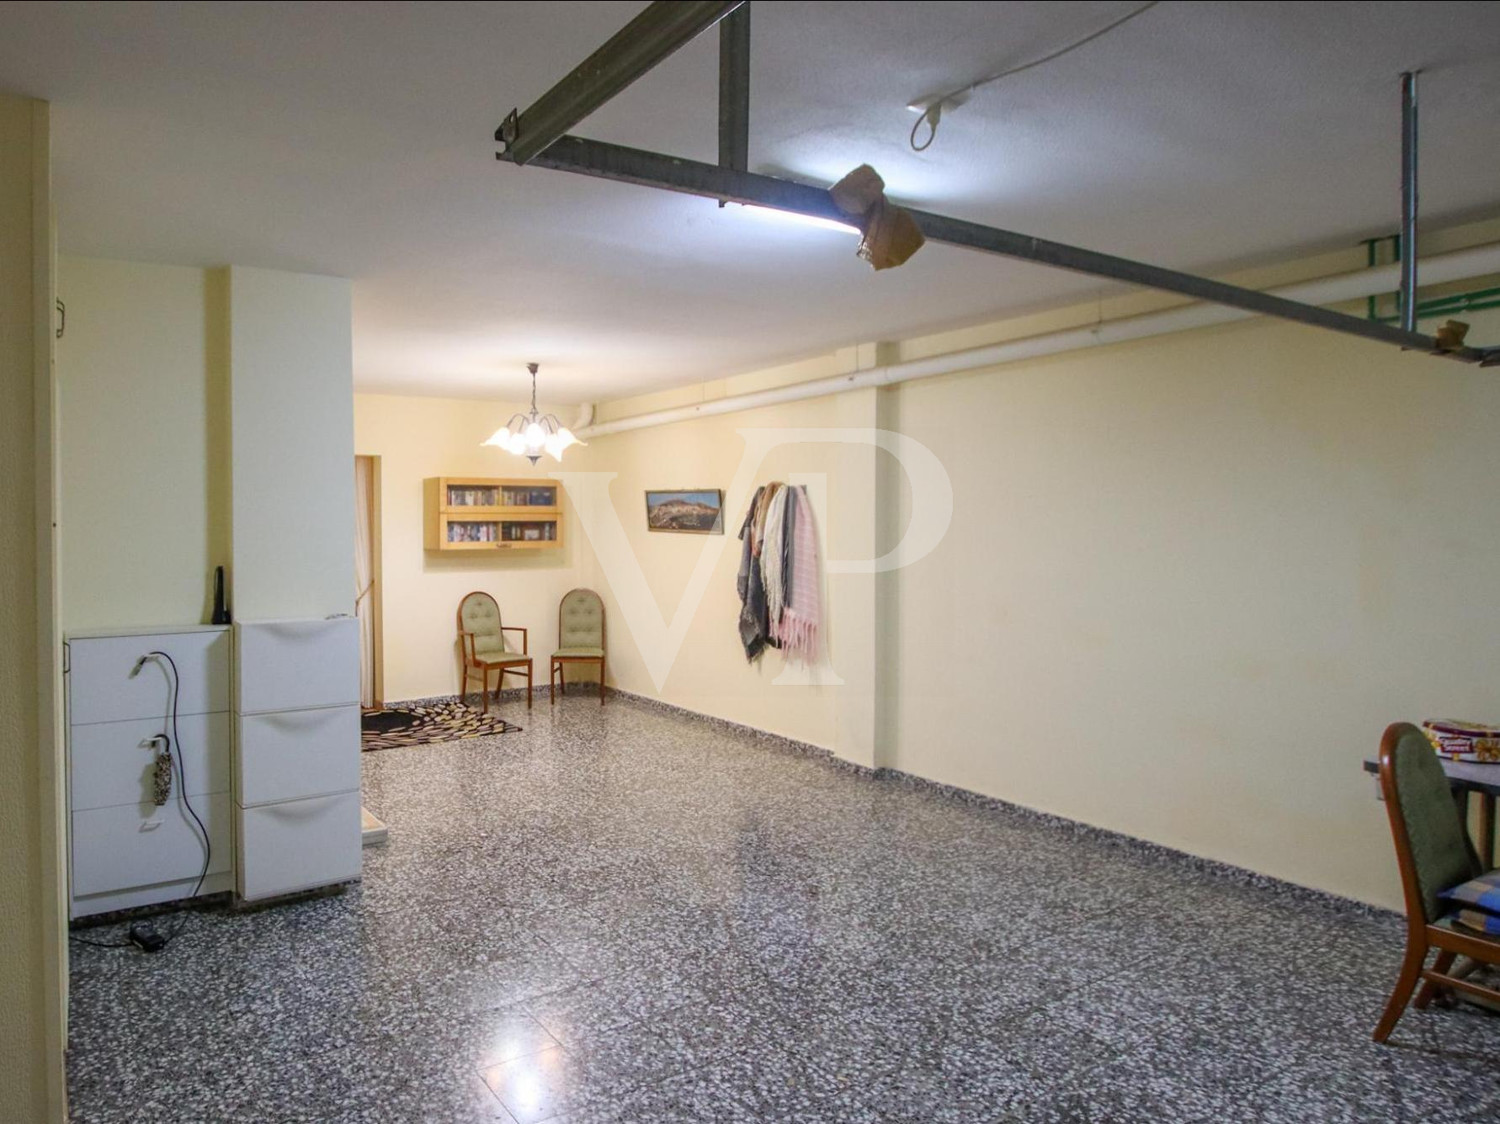 Attractive townhouse in a quiet community in Chayofa